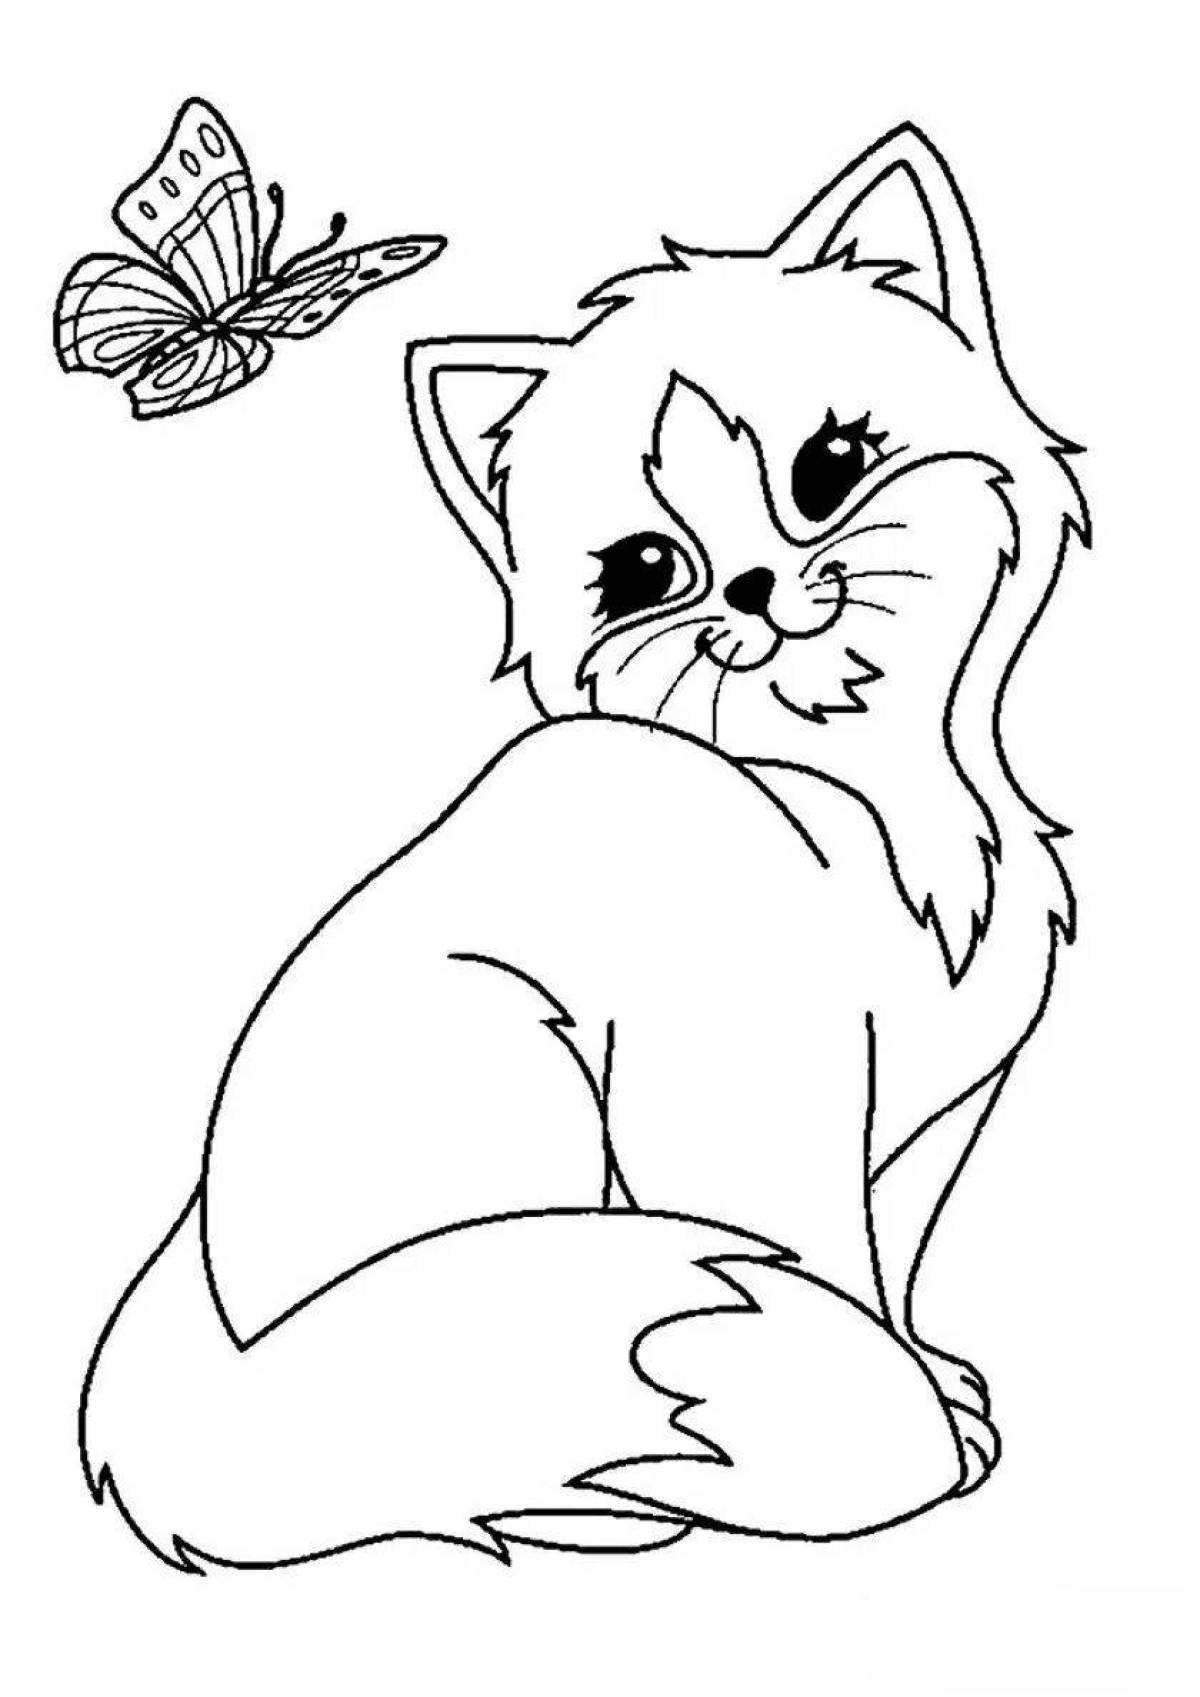 Magical cat coloring book for kids